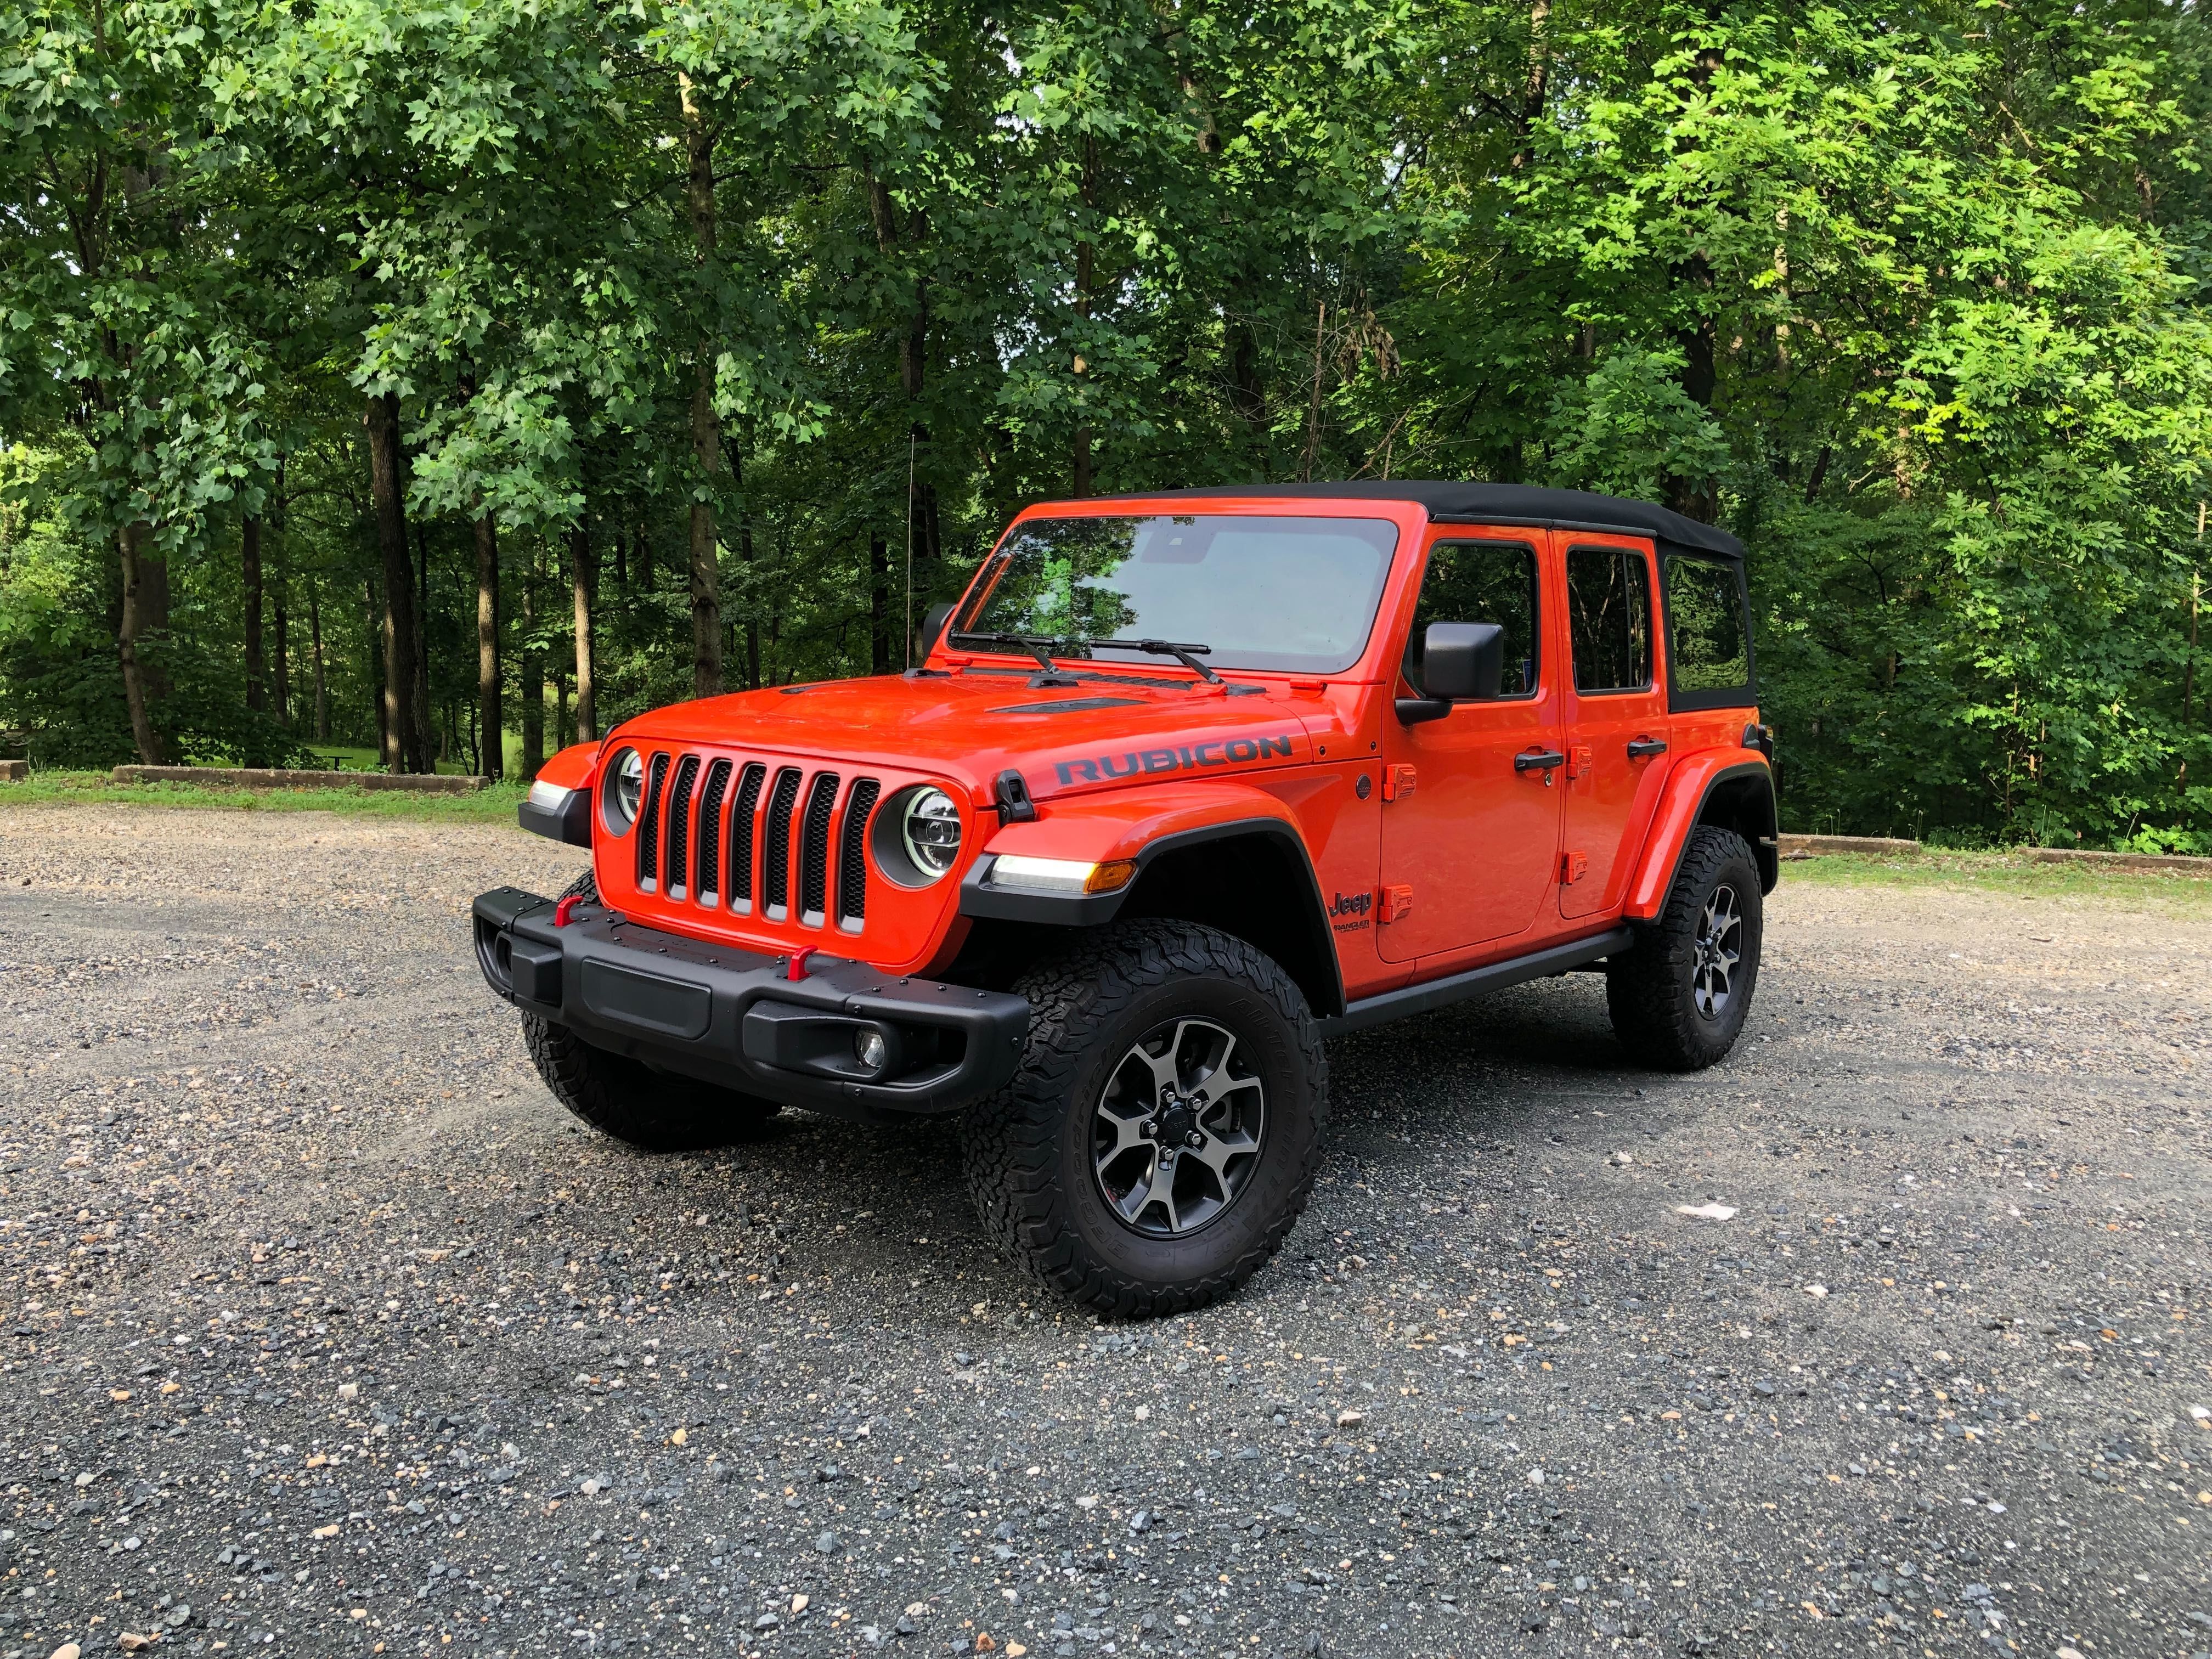 Jeep Wrangler Unlimited Rubicon is easier to live with, still a capable  off-road go-anywhere SUV - WTOP News